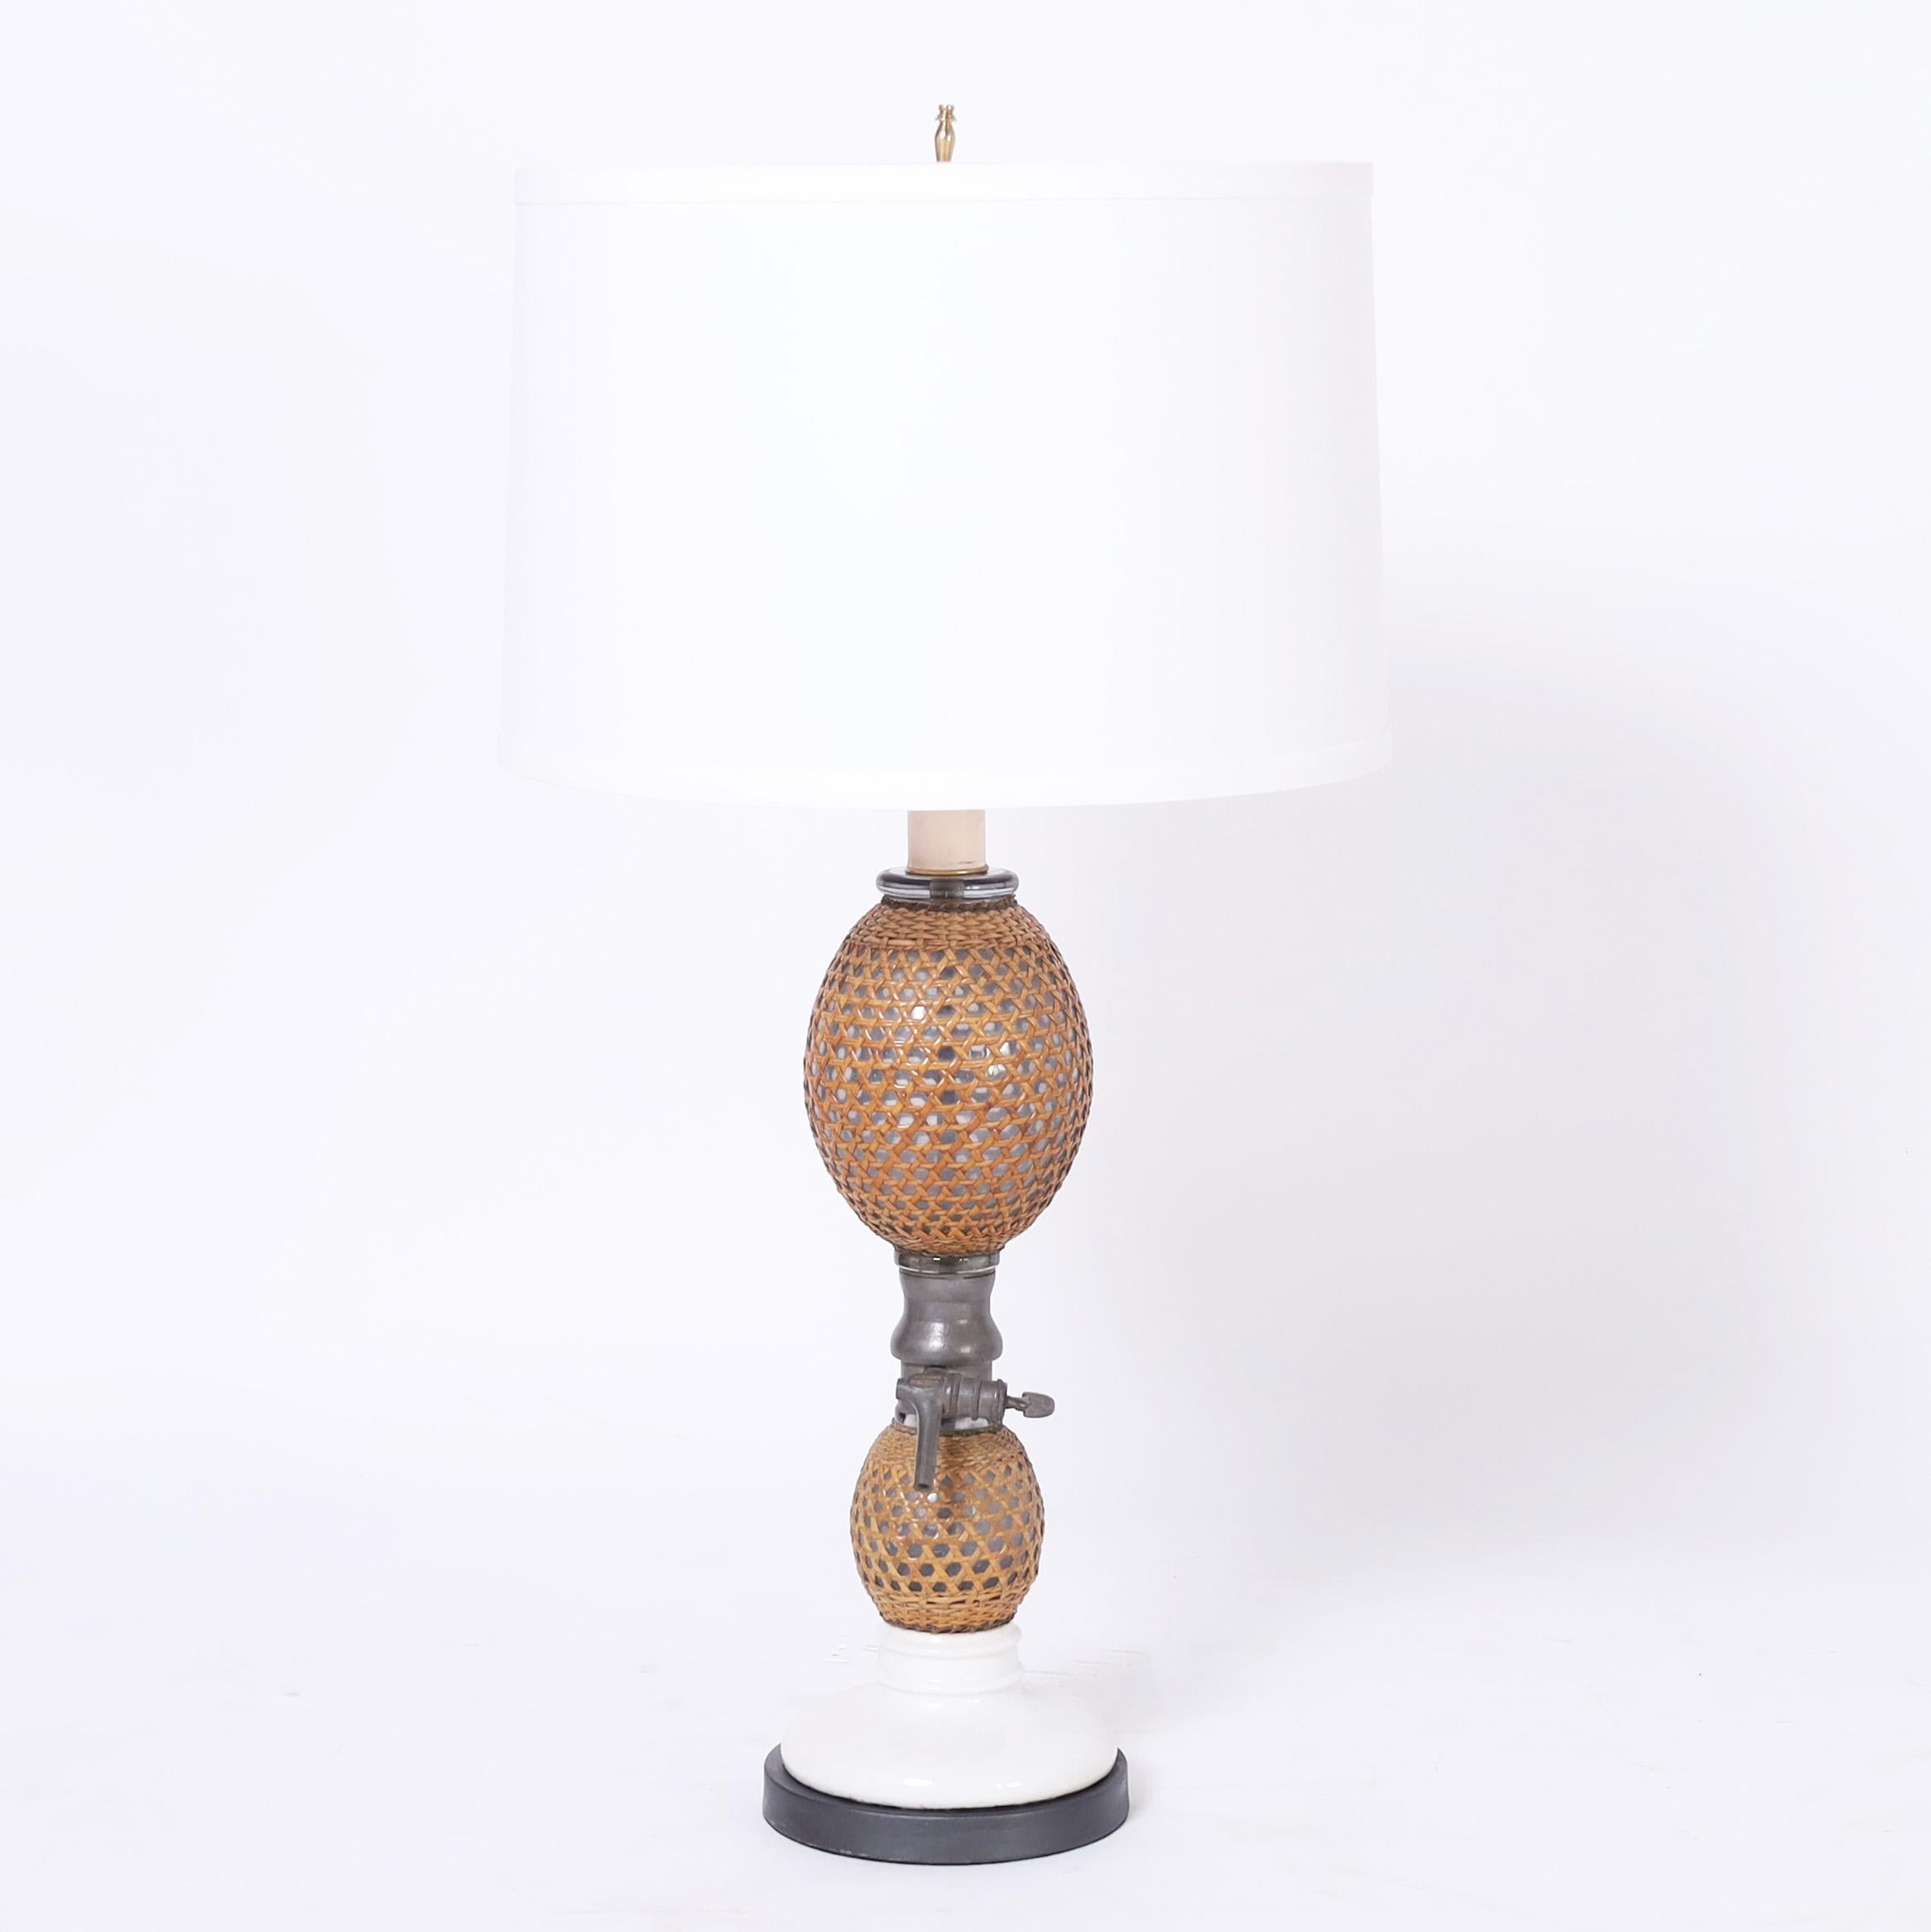 Pair of French table lamps, once seltzer bottles, having two hand blown glass bulbs clad in woven rattan with pewter hardware and porcelain bases. 